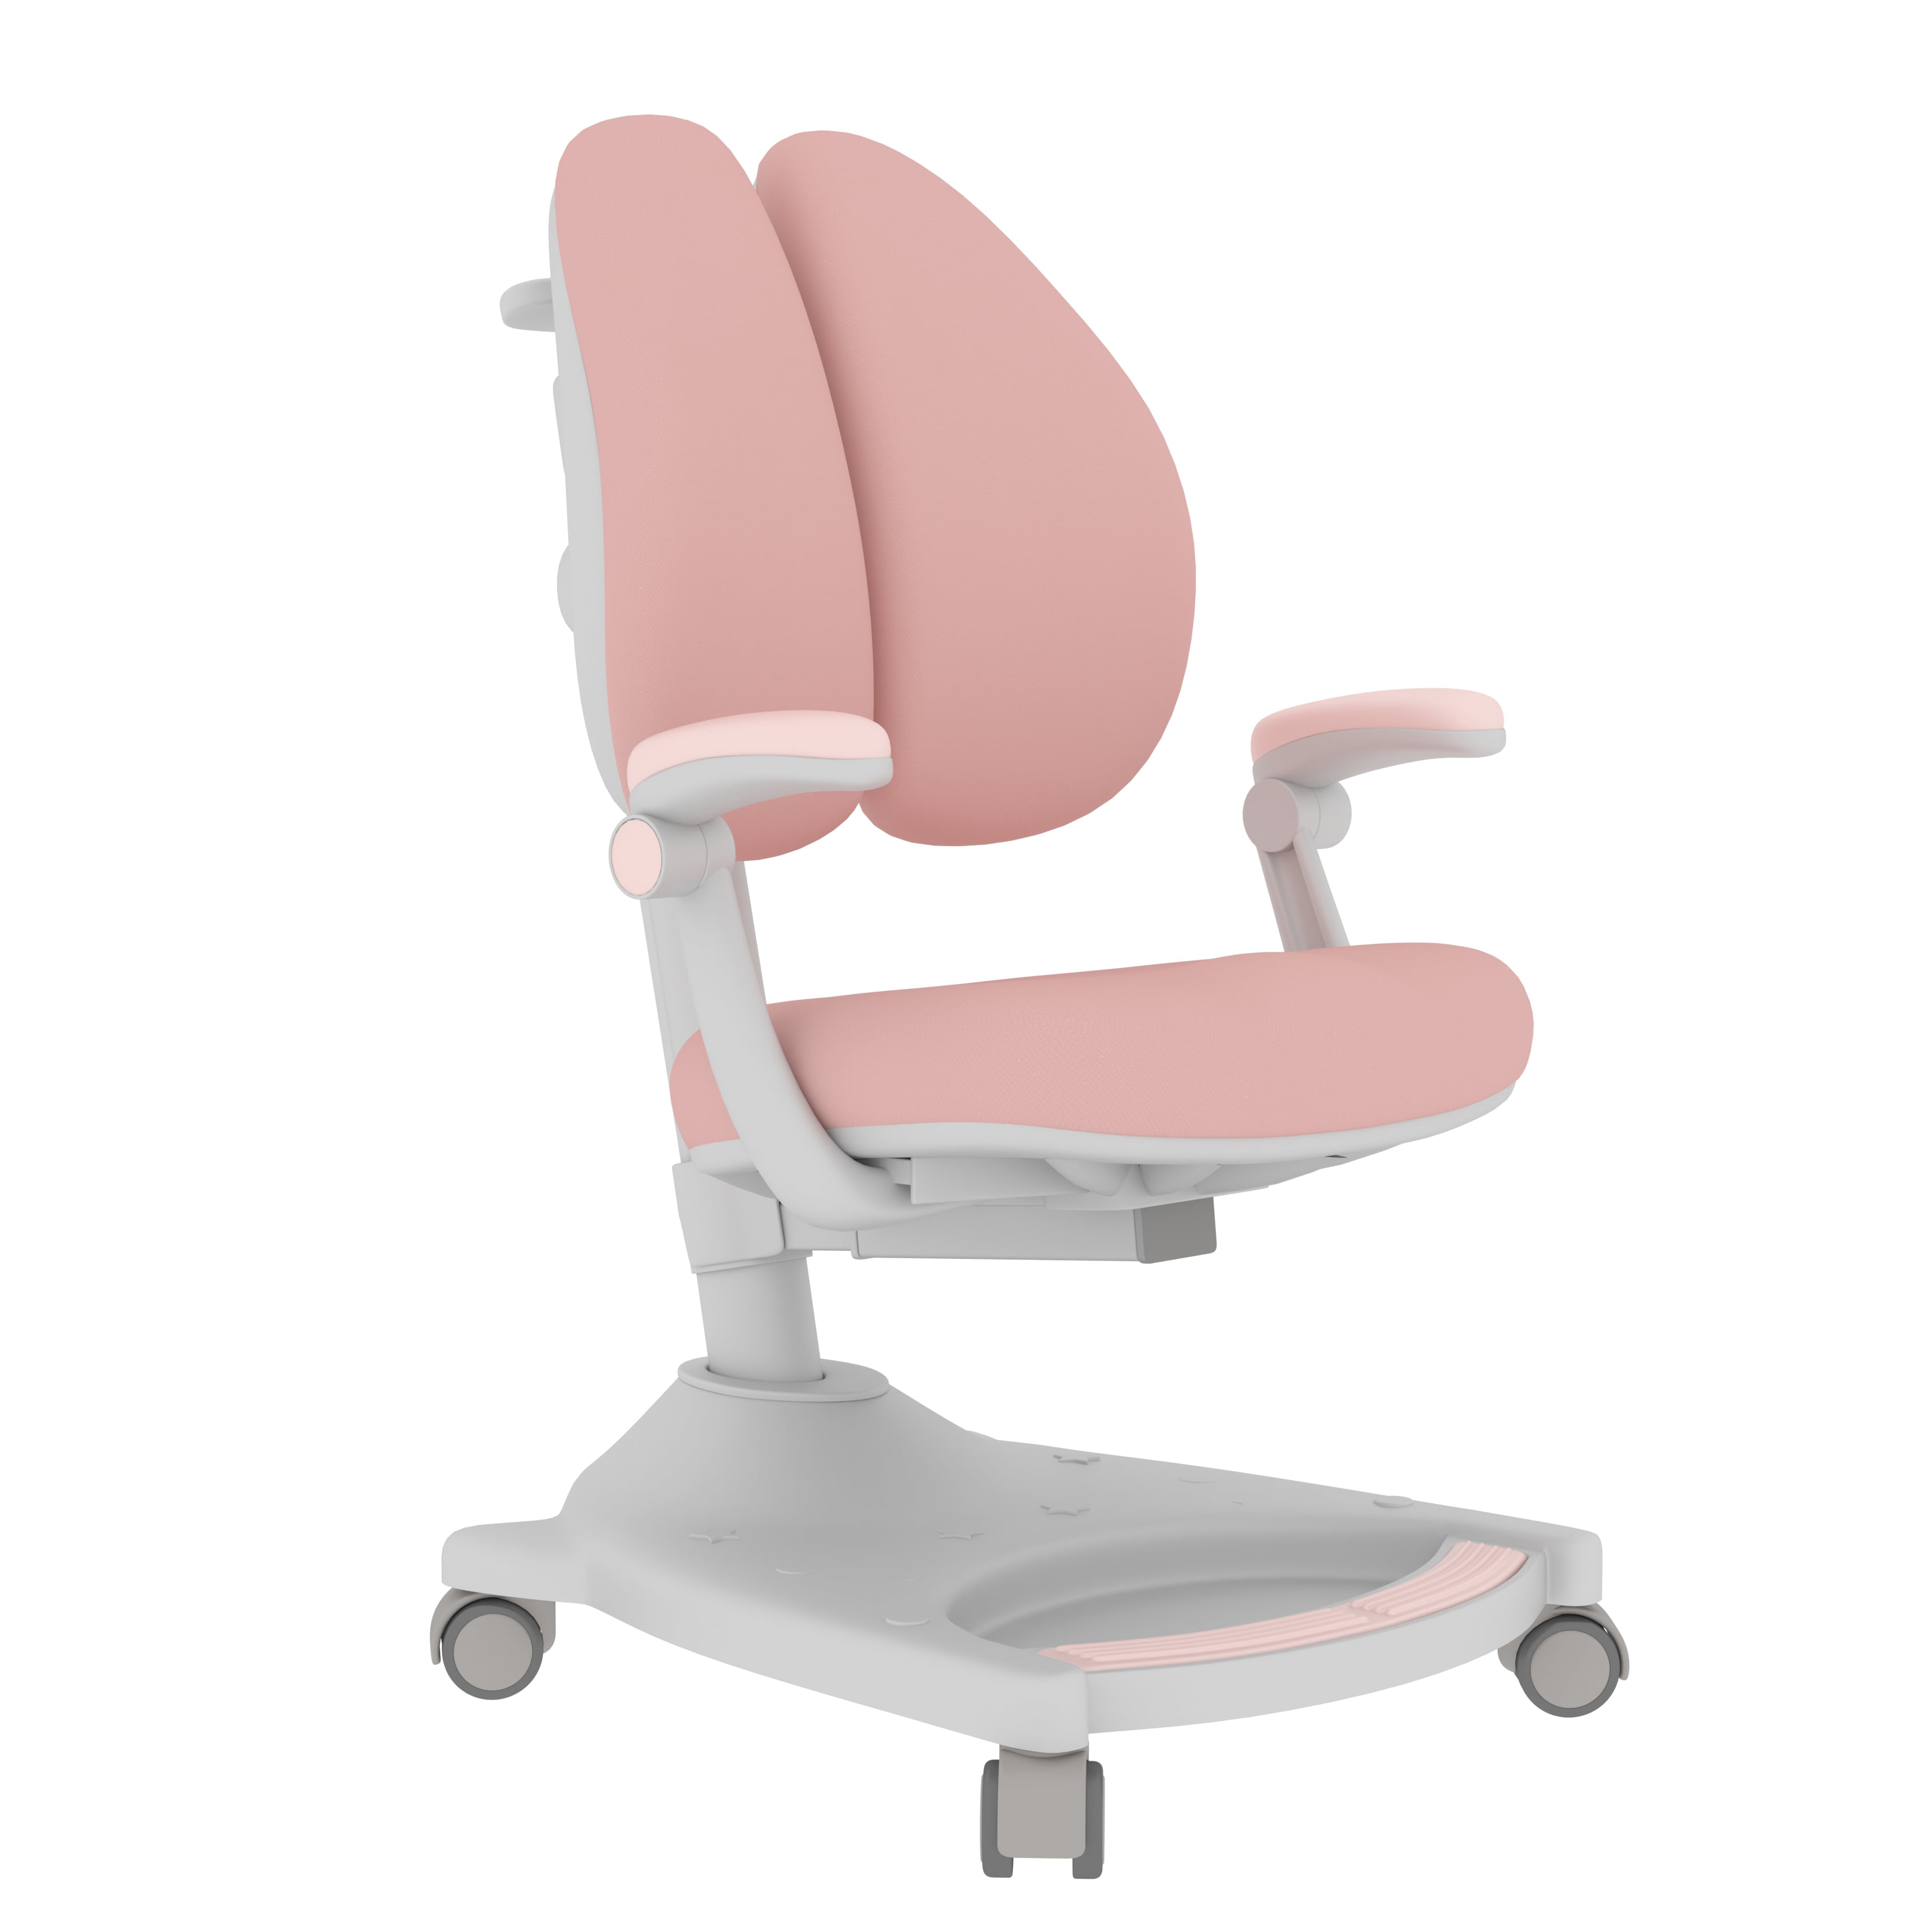 Details about   Ergonomic Adjustable Backrest Kids Study Chair with Support Bar Home Study Pink 